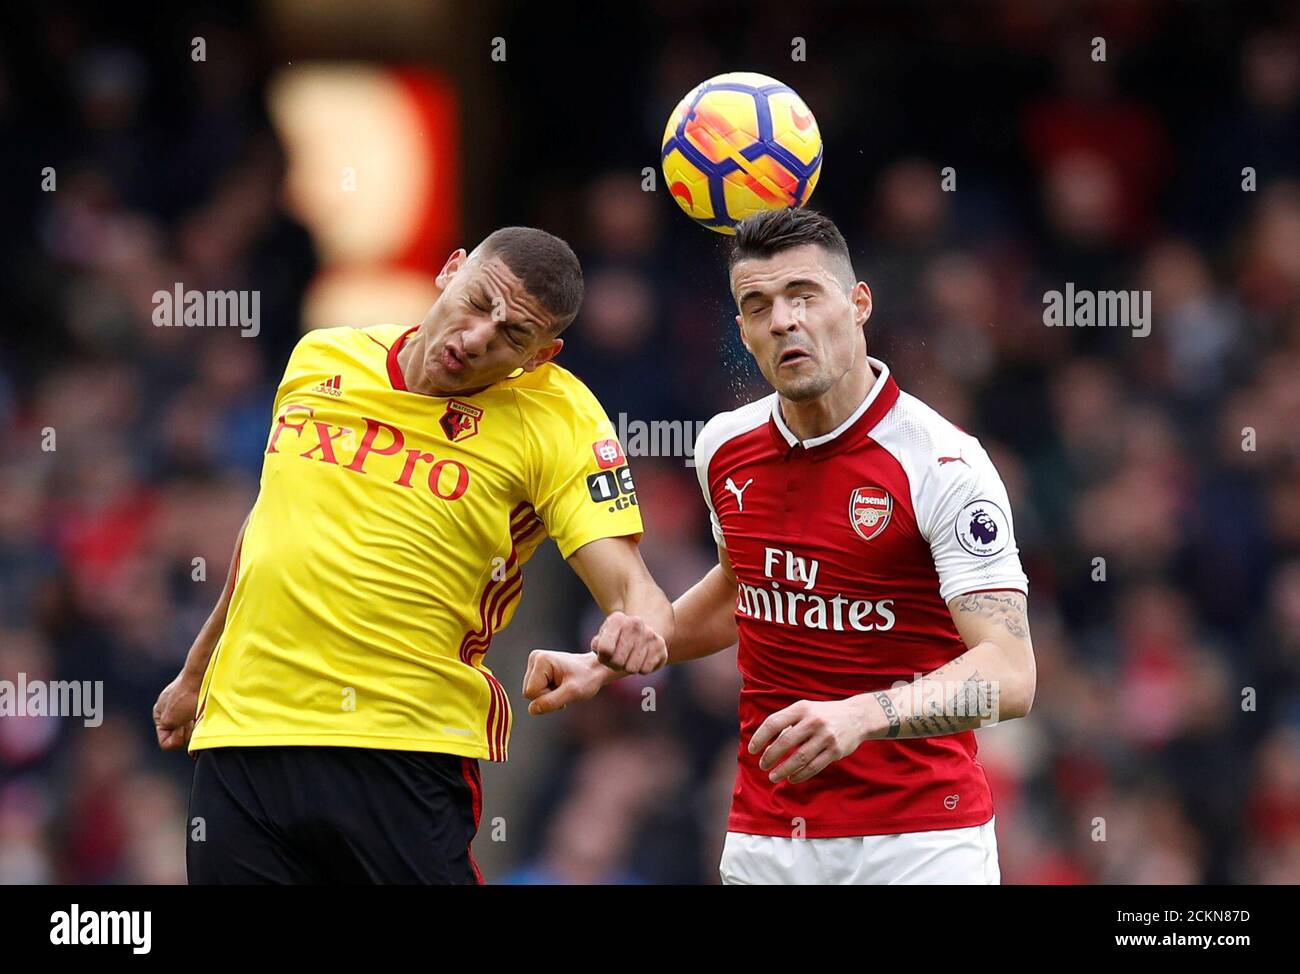 Soccer Football - Premier League - Arsenal vs Watford - Emirates Stadium, London, Britain - March 11, 2018   Watford's Richarlison in action with Arsenal's Granit Xhaka              REUTERS/Eddie Keogh    EDITORIAL USE ONLY. No use with unauthorized audio, video, data, fixture lists, club/league logos or 'live' services. Online in-match use limited to 75 images, no video emulation. No use in betting, games or single club/league/player publications.  Please contact your account representative for further details. Stock Photo